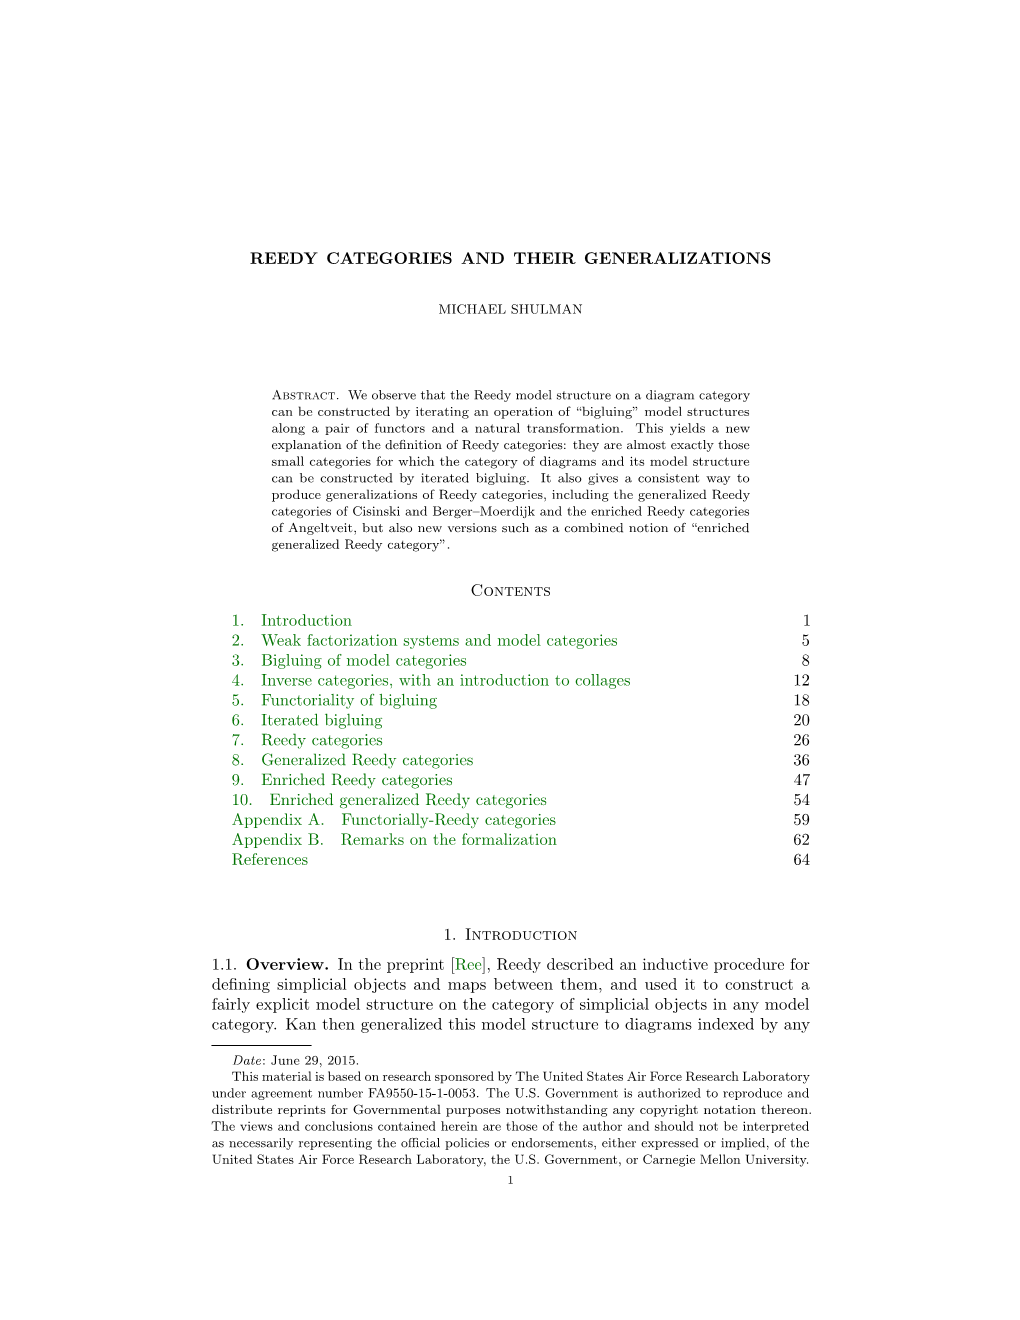 REEDY CATEGORIES and THEIR GENERALIZATIONS Contents 1